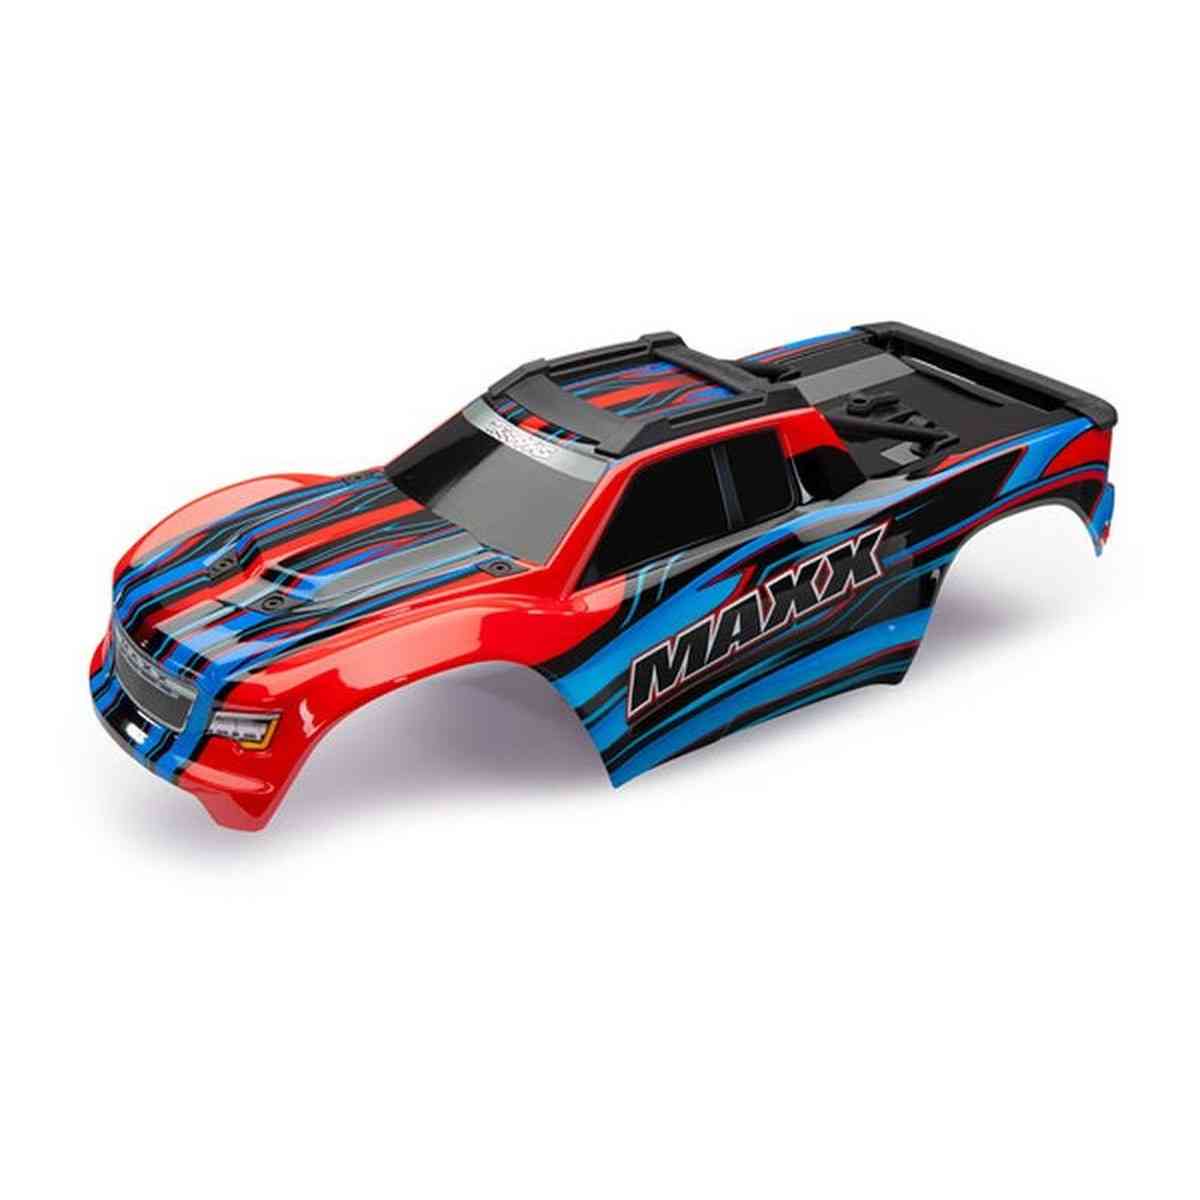 Traxxas Body, Maxx, red-x (painted)